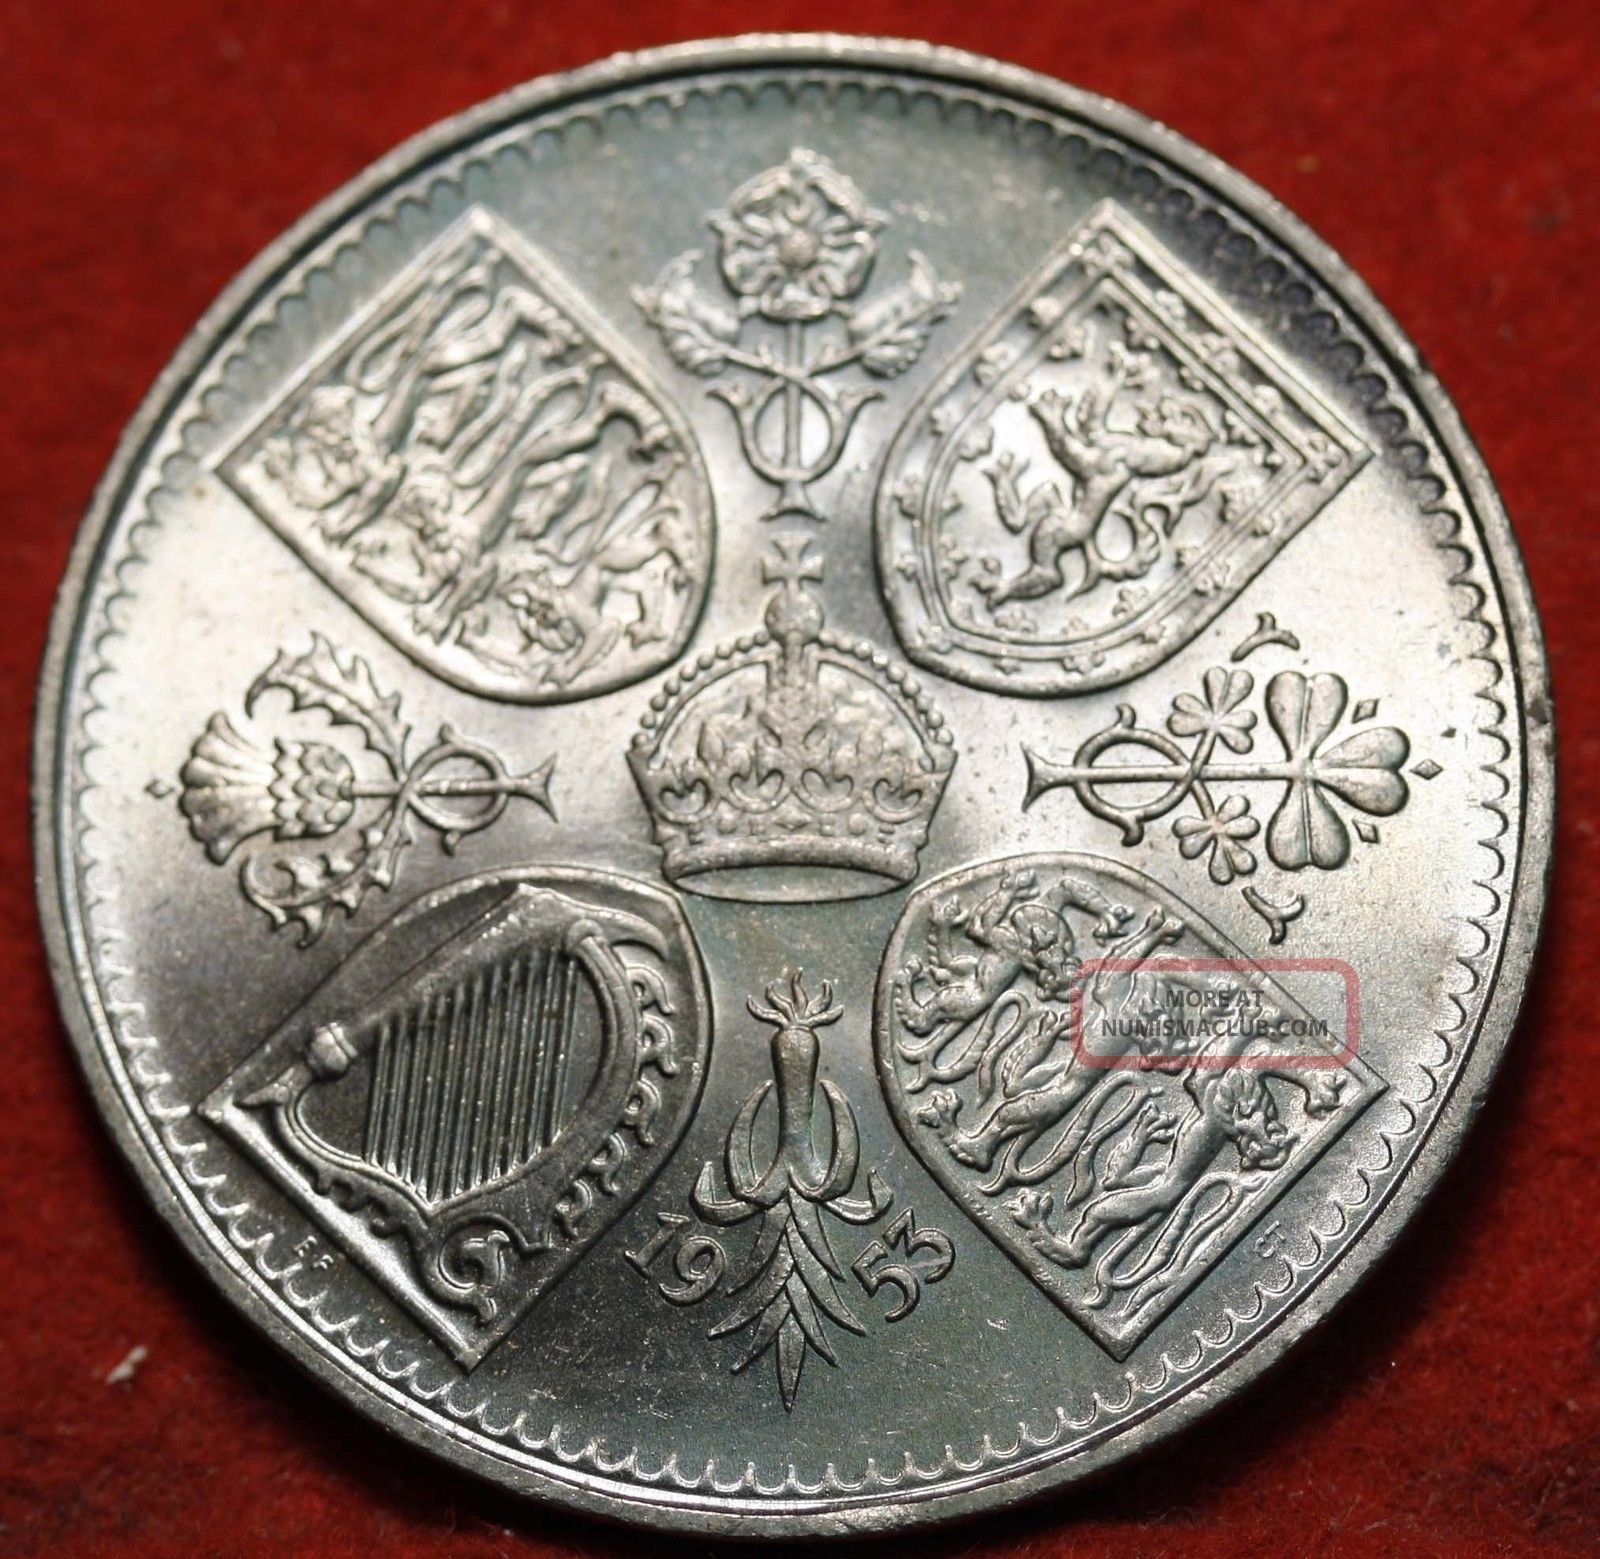 uncirculated-1953-great-britain-5-shilling-foreign-coin-s-h